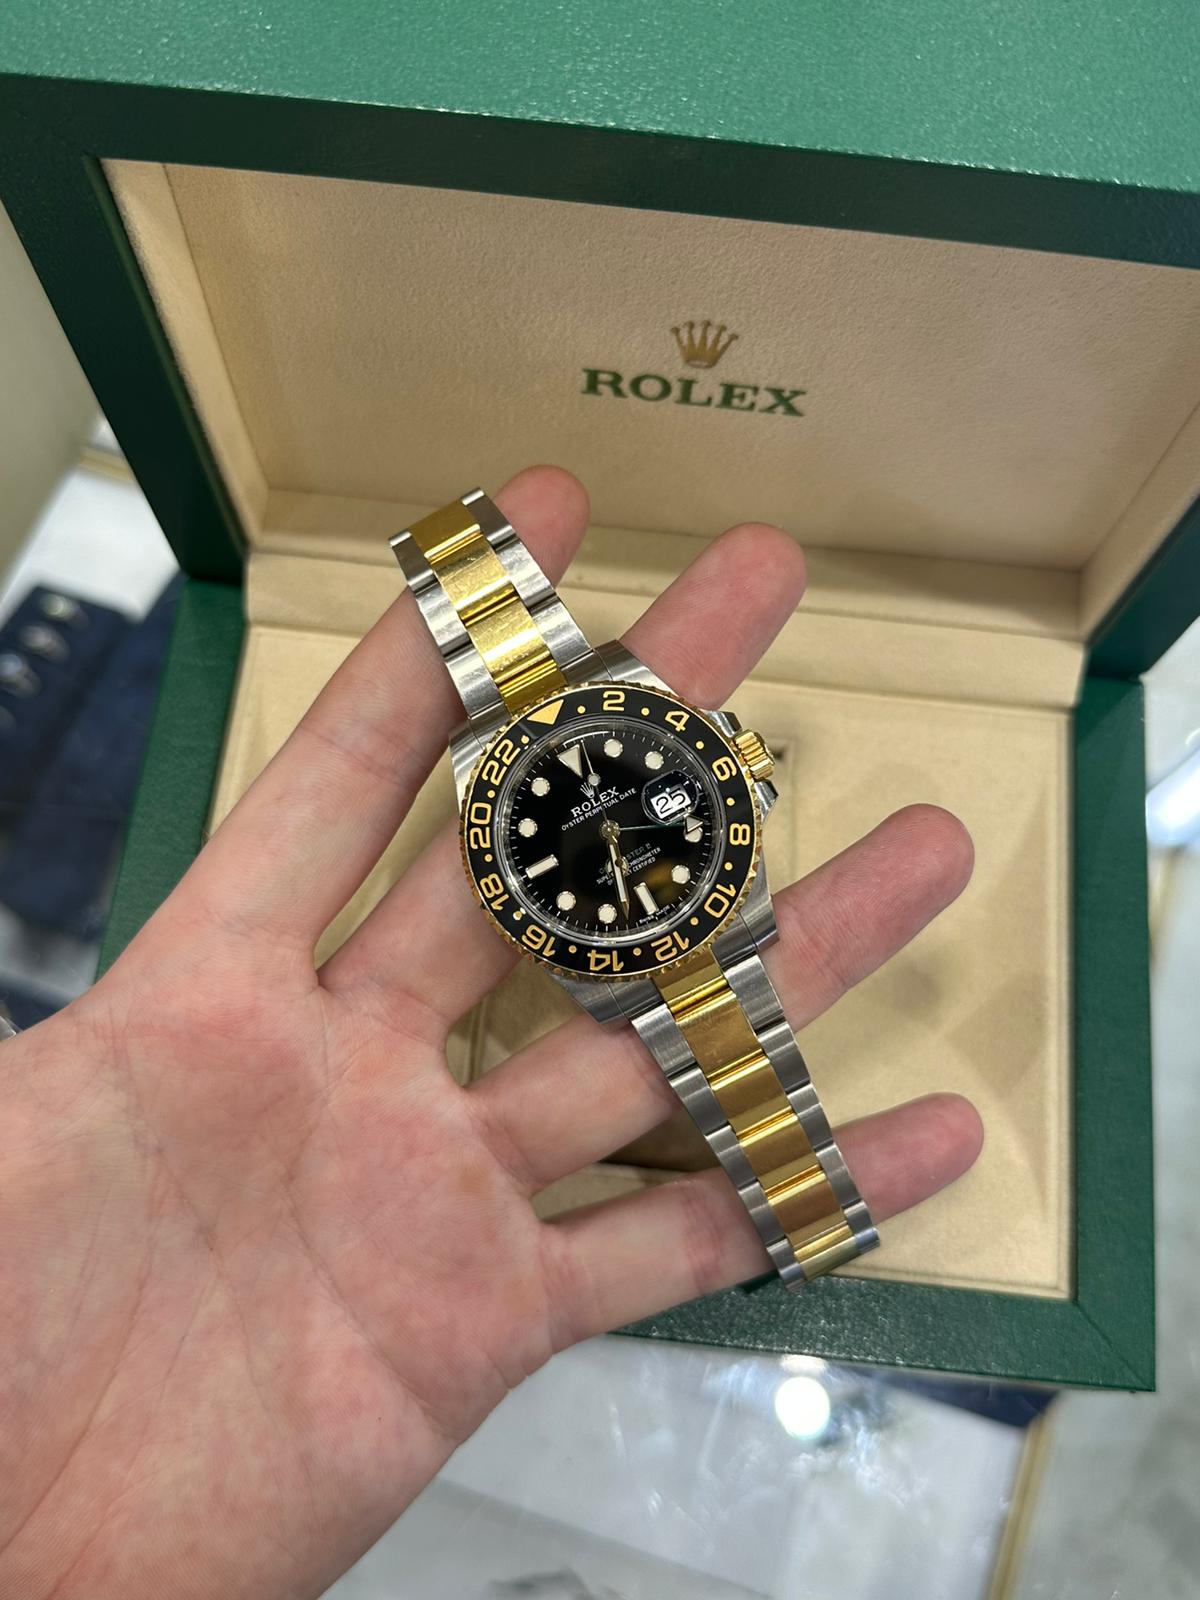 Rolex GMT-Master II steel and gold - 116713LN disc - Image 9 of 11